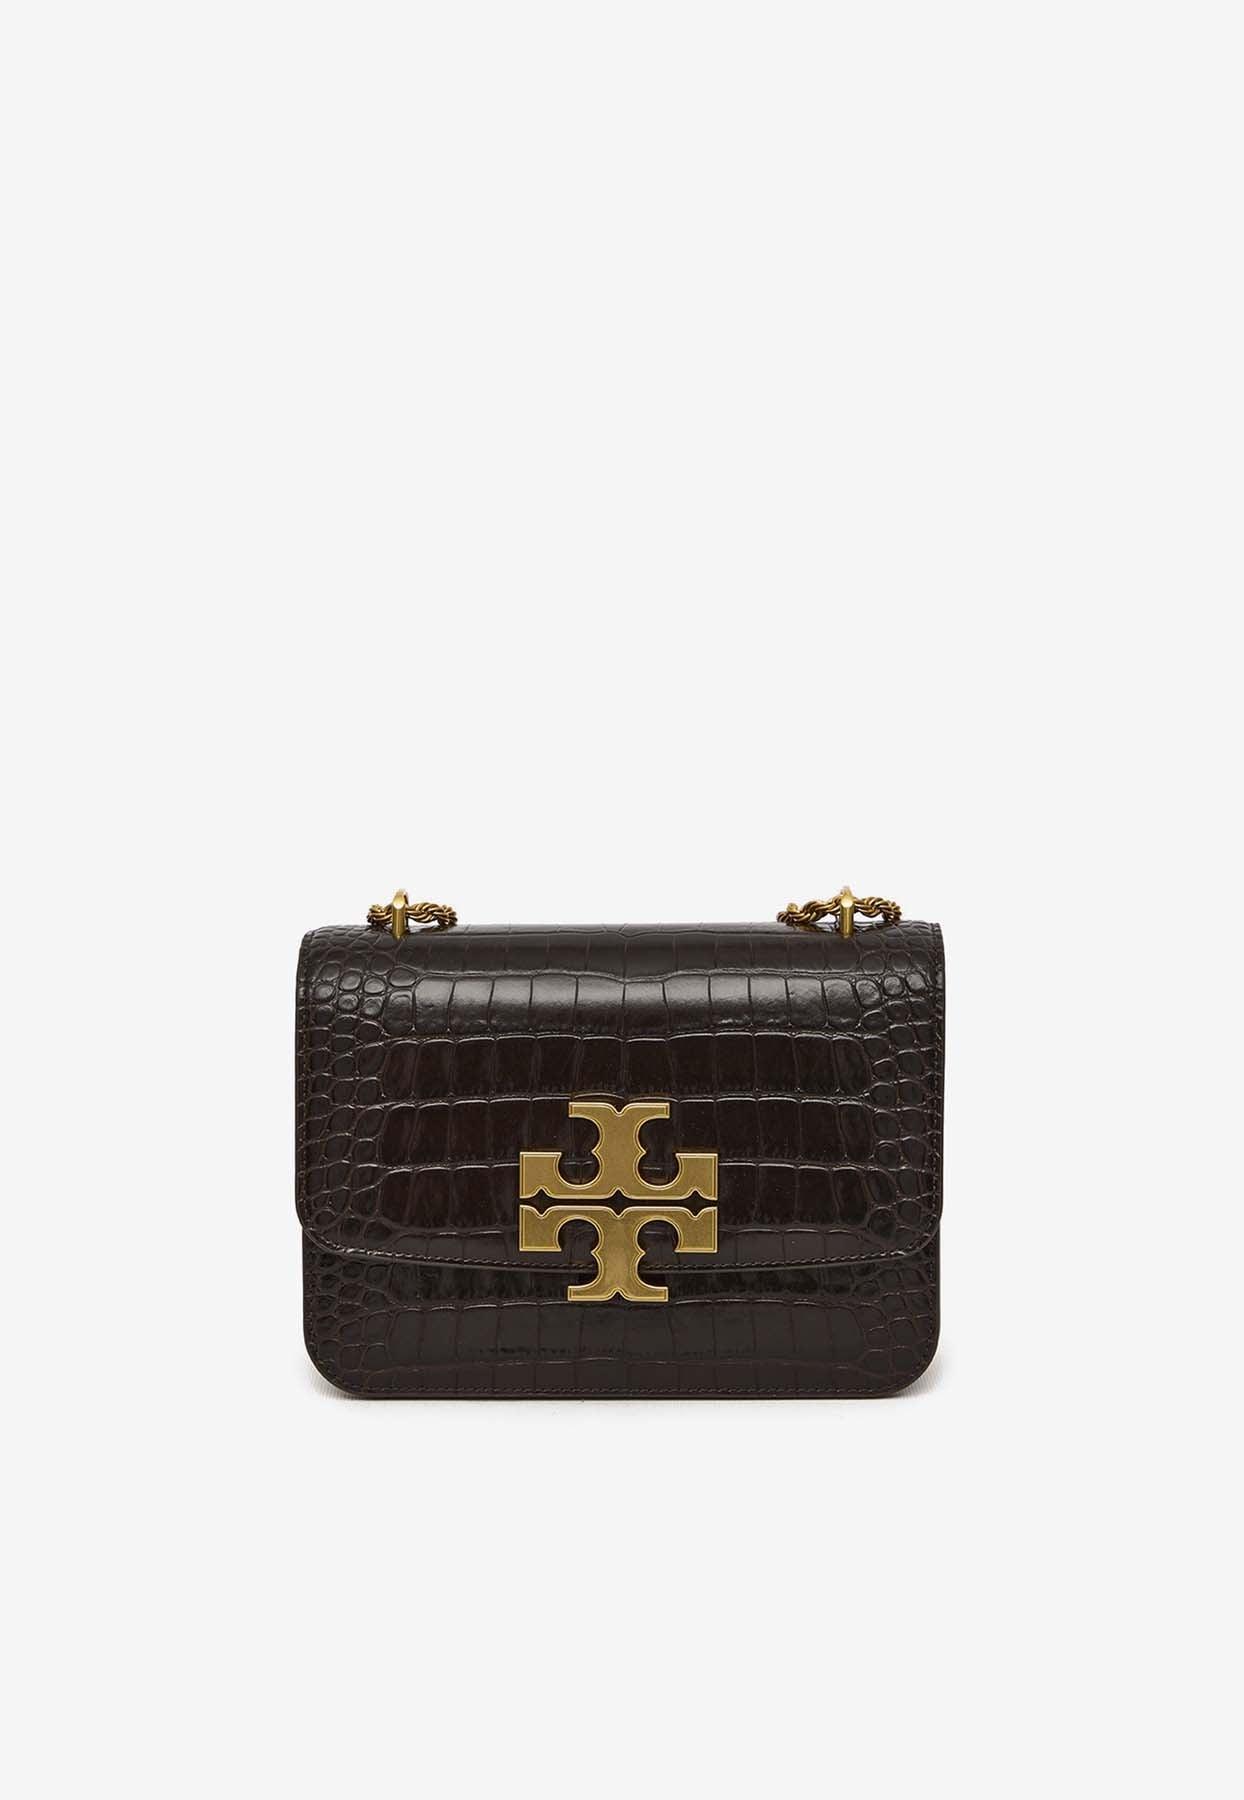 Tory Burch Eleanor Shoulder Bag In Croc Embossed Leather in White | Lyst